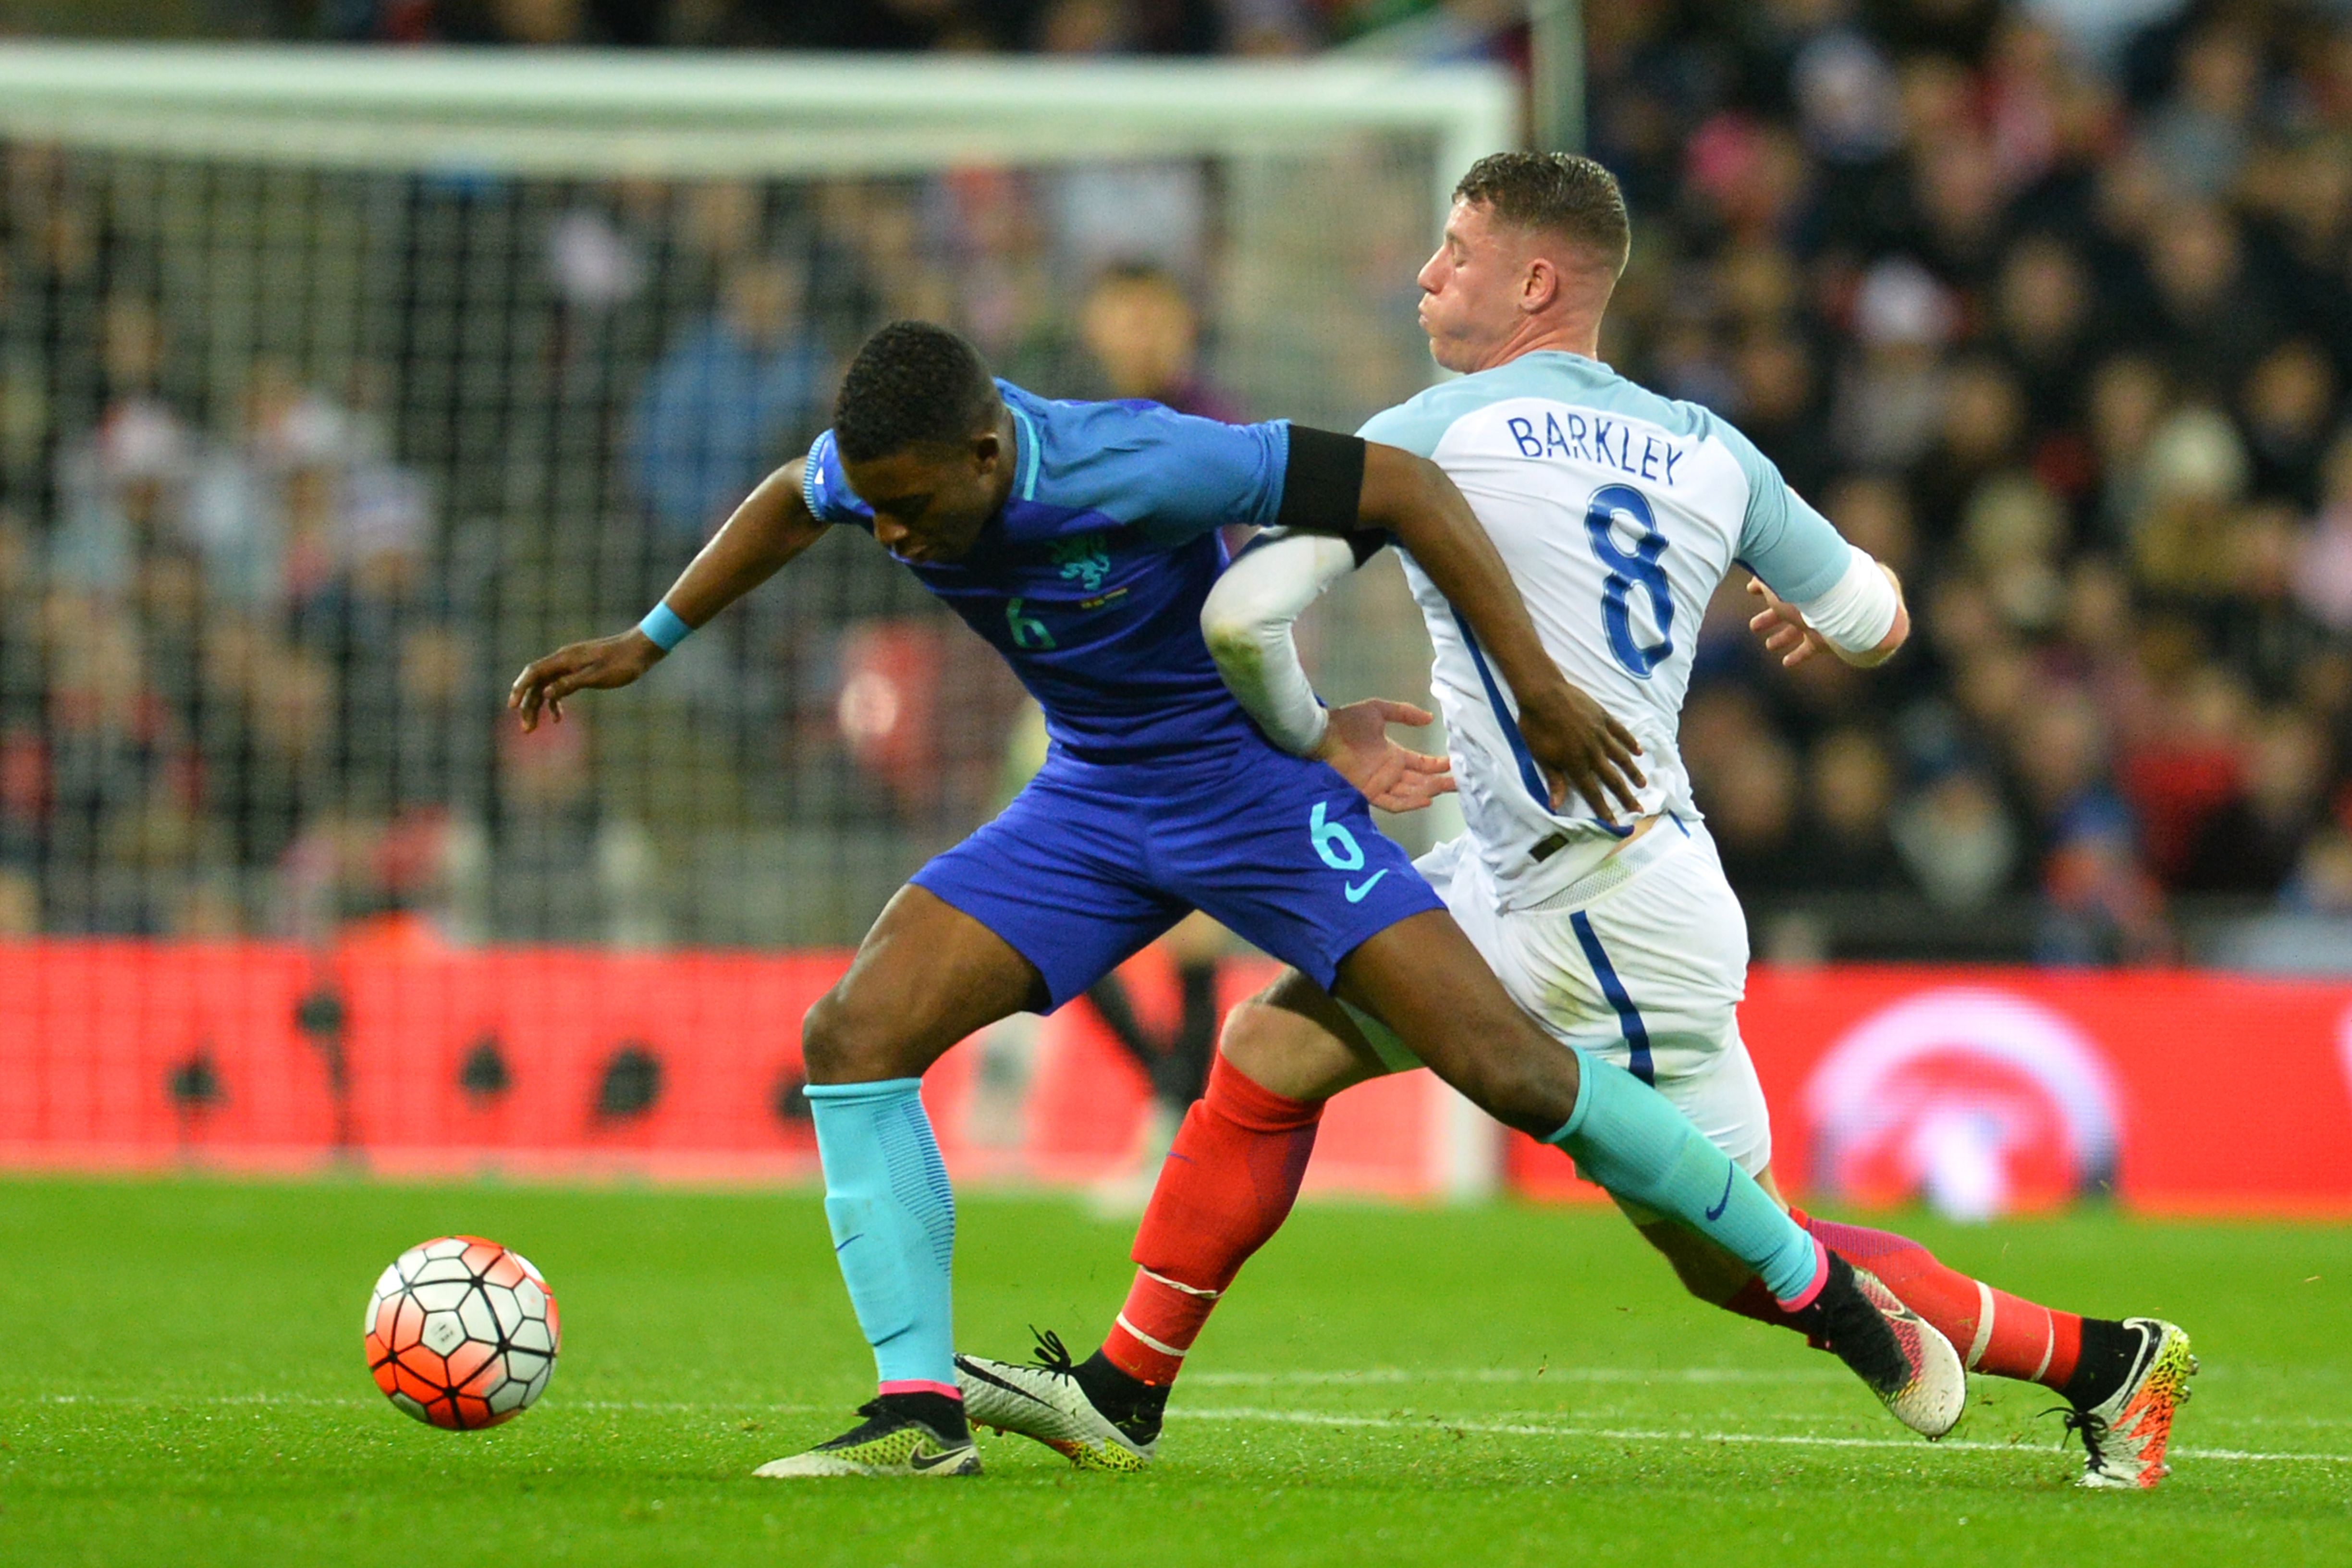 England's midfielder Ross Barkley (R) takes on Netherlands' midfielder Riechedly Bazoer (L) during the international friendly football match between England and Netherlands at Wembley Stadium in London on March 29, 2016. / AFP / GLYN KIRK / NOT FOR MARKETING OR ADVERTISING USE / RESTRICTED TO EDITORIAL USE (Photo credit should read GLYN KIRK/AFP/Getty Images)